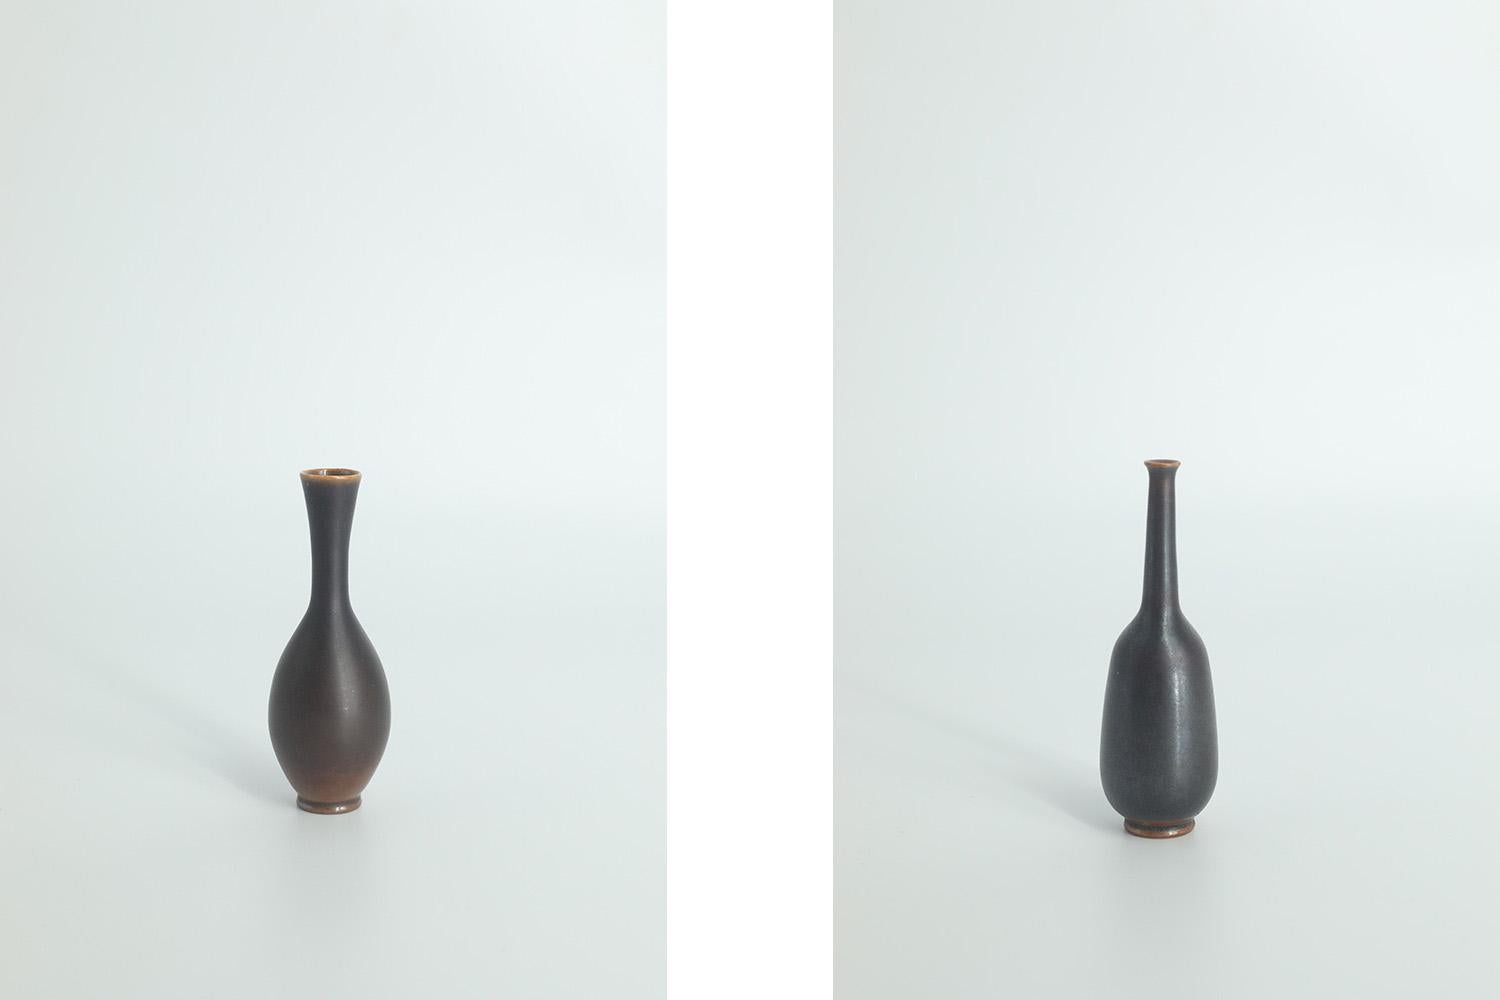 
1. Height 8.5 cm  Width 2.5 cm  Depth 2.5 cm
2. Height 8 cm  Width 2.5 cm  Depth 2.5 cm

This set of 2 miniature vases was designed by John Andersson for the Swedish manufacture Höganäs Keramik during the 1950s. Handmade by the Master, with the